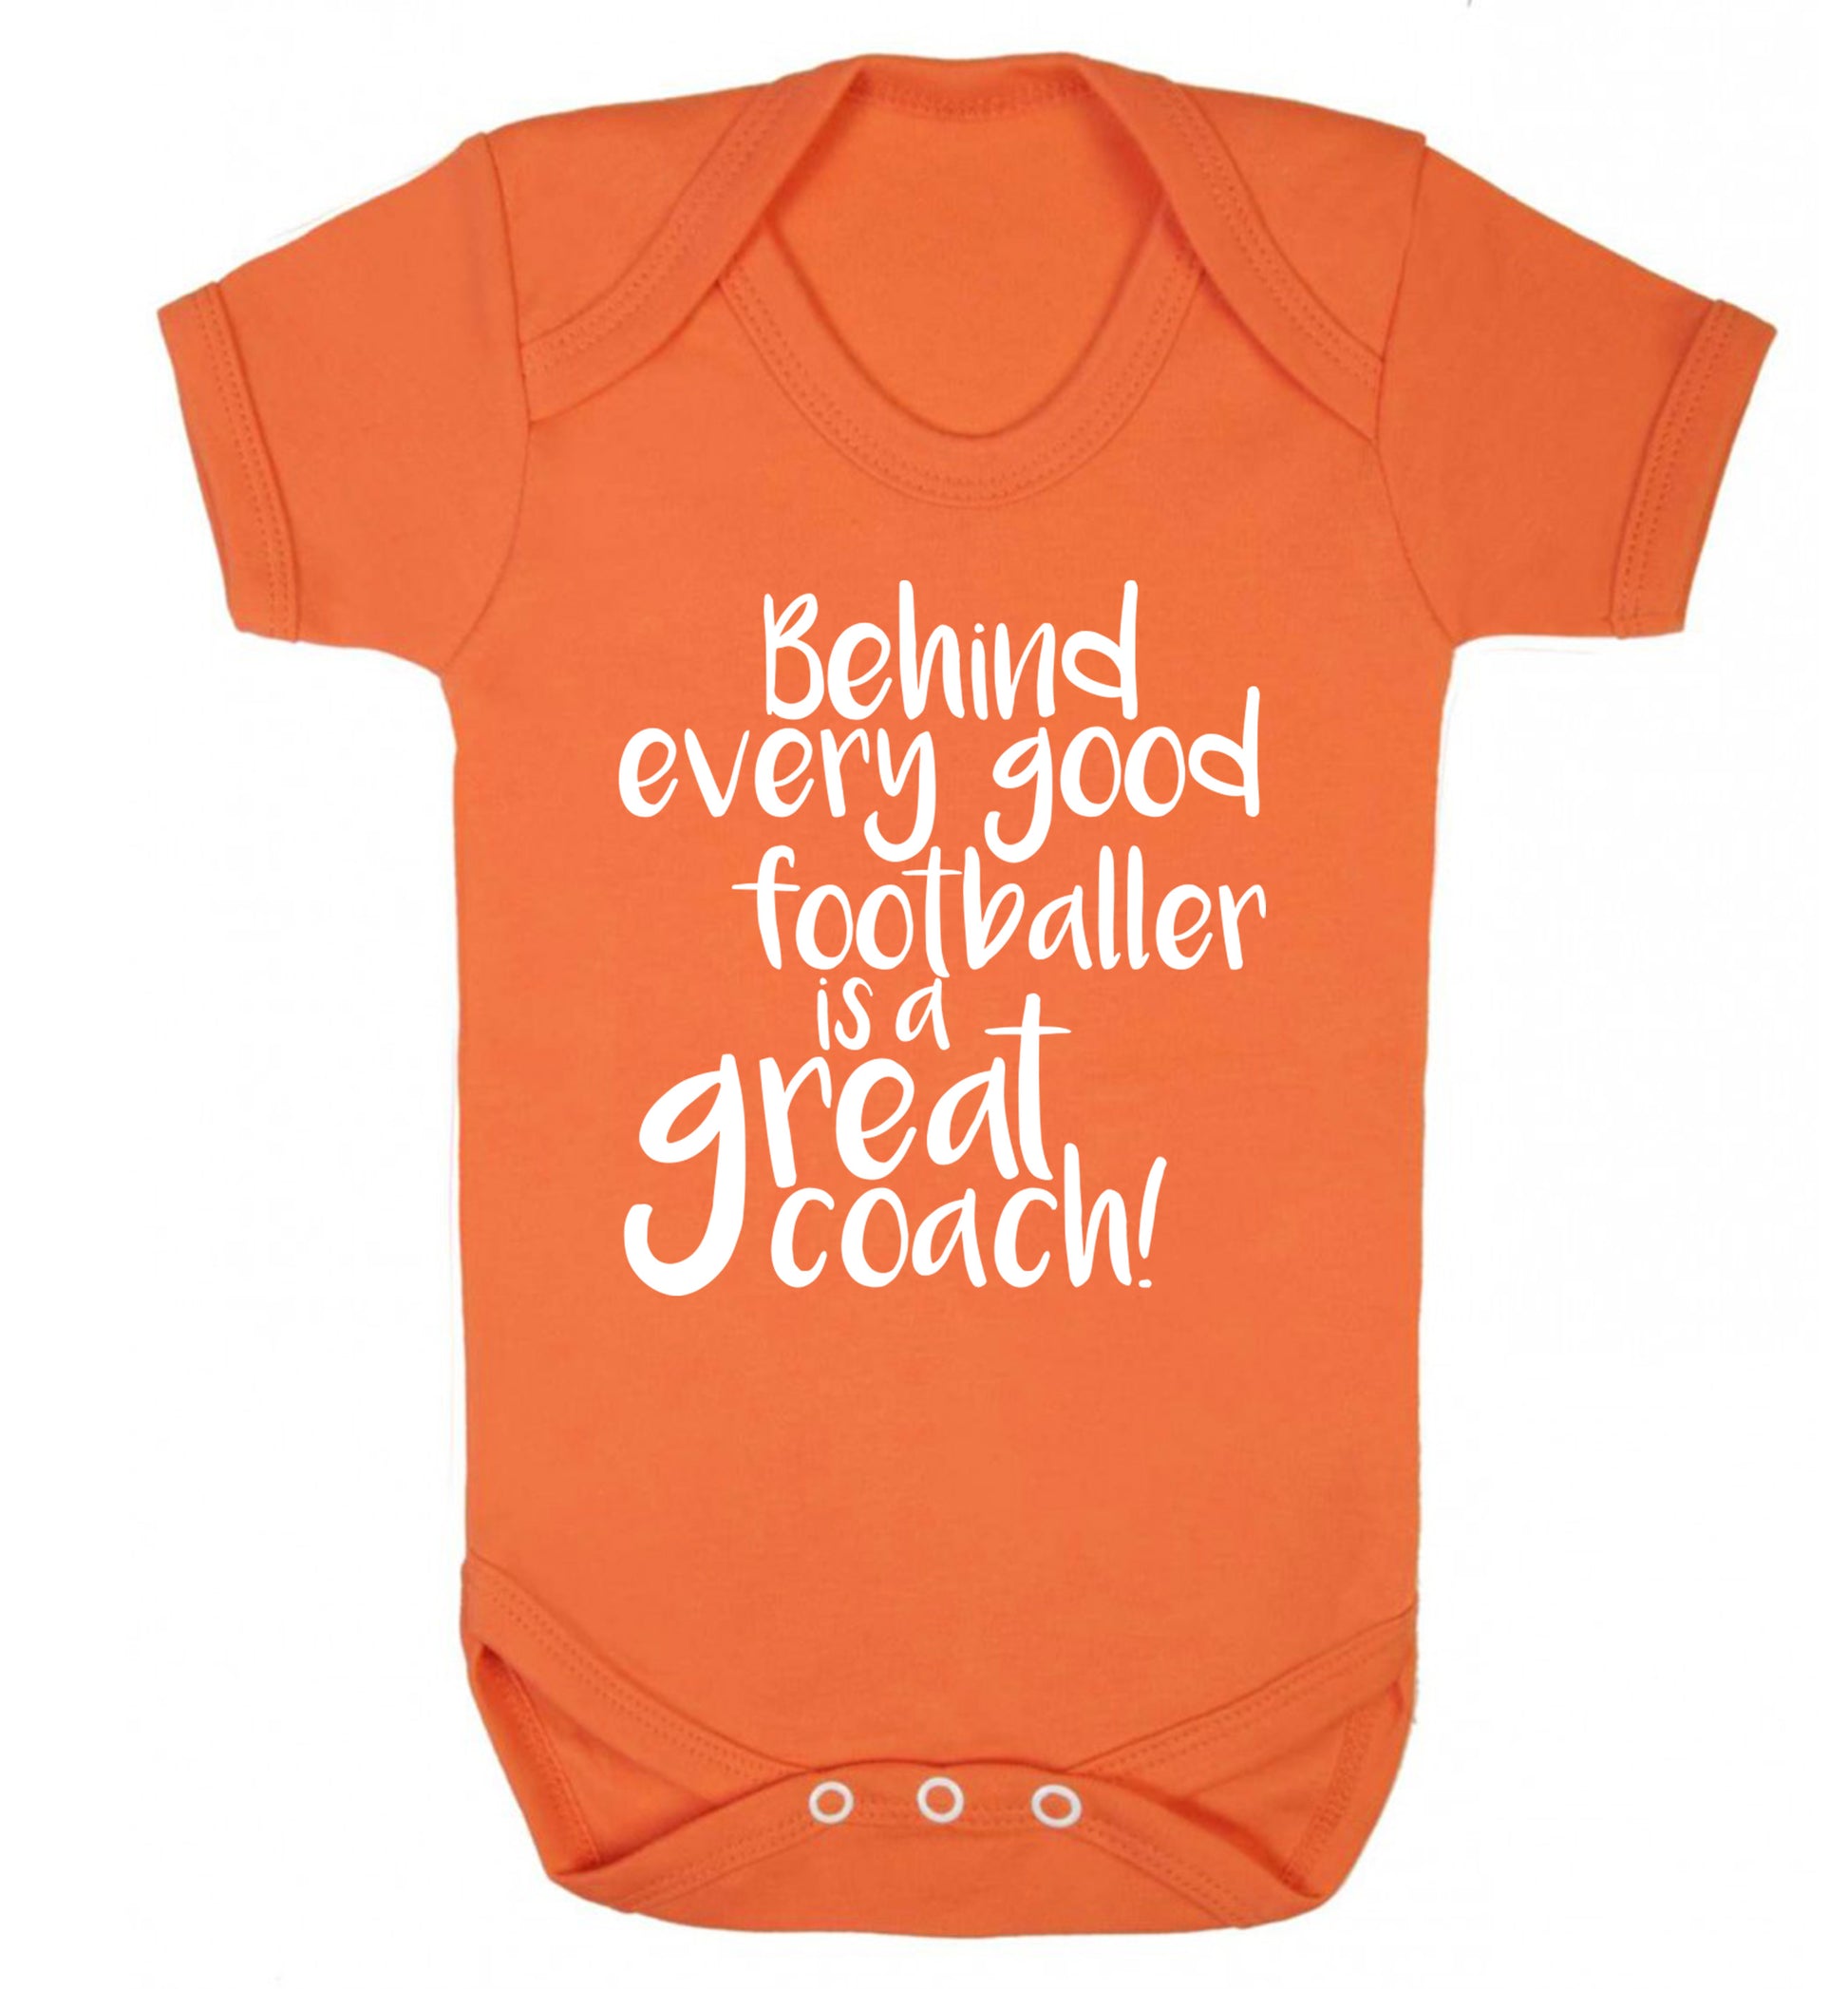 Behind every good footballer is a great coach! Baby Vest orange 18-24 months